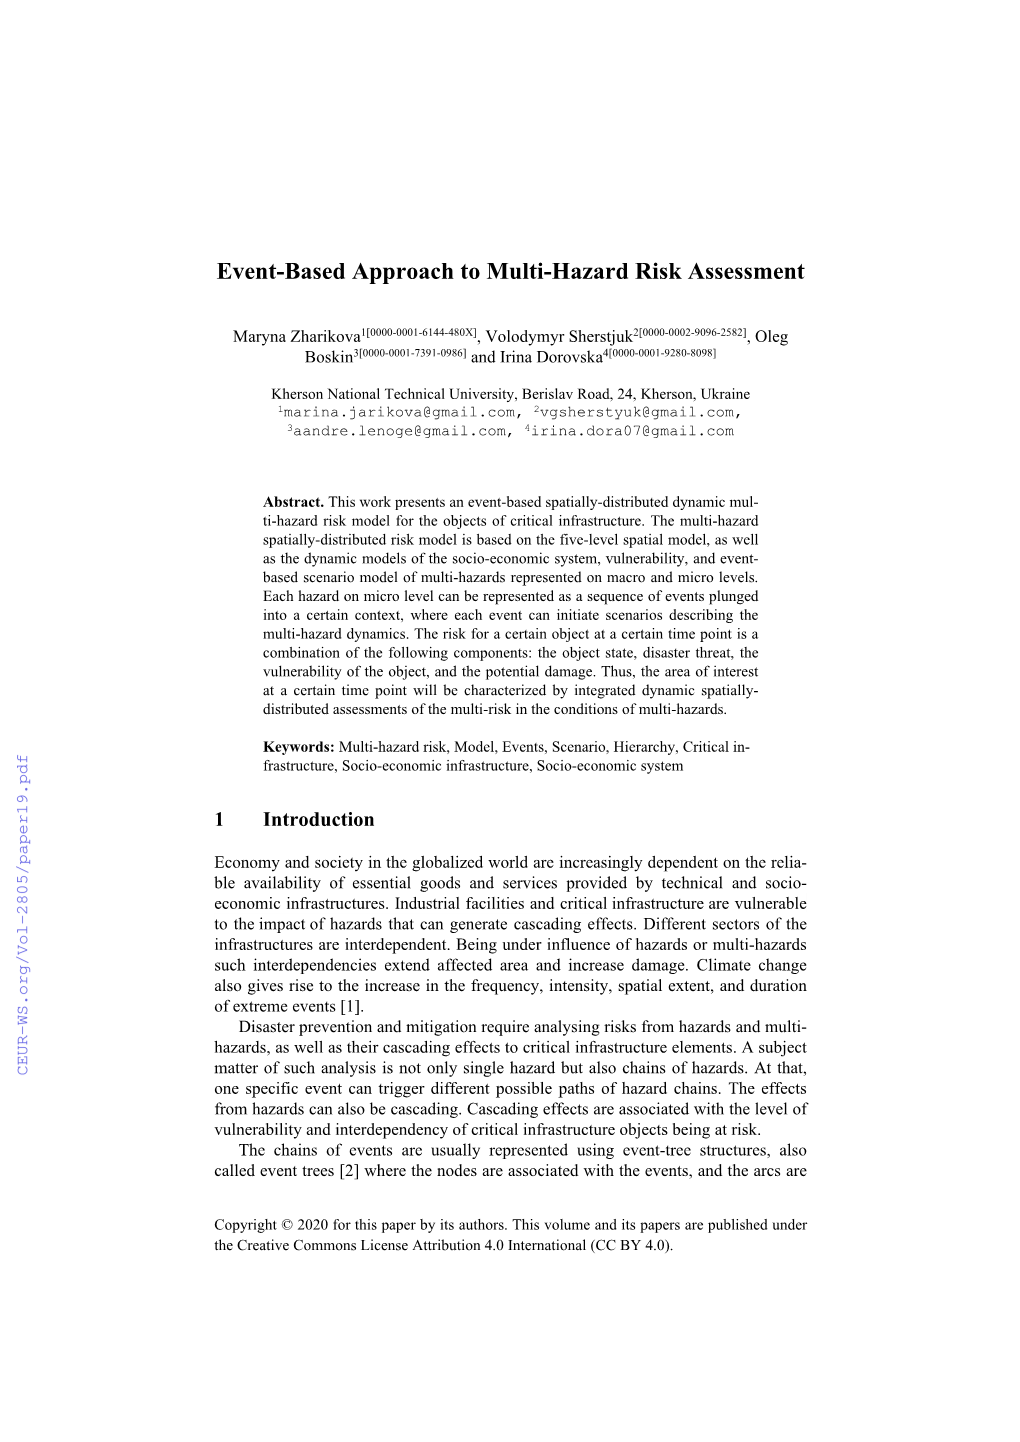 Event-Based Approach to Multi-Hazard Risk Assessment